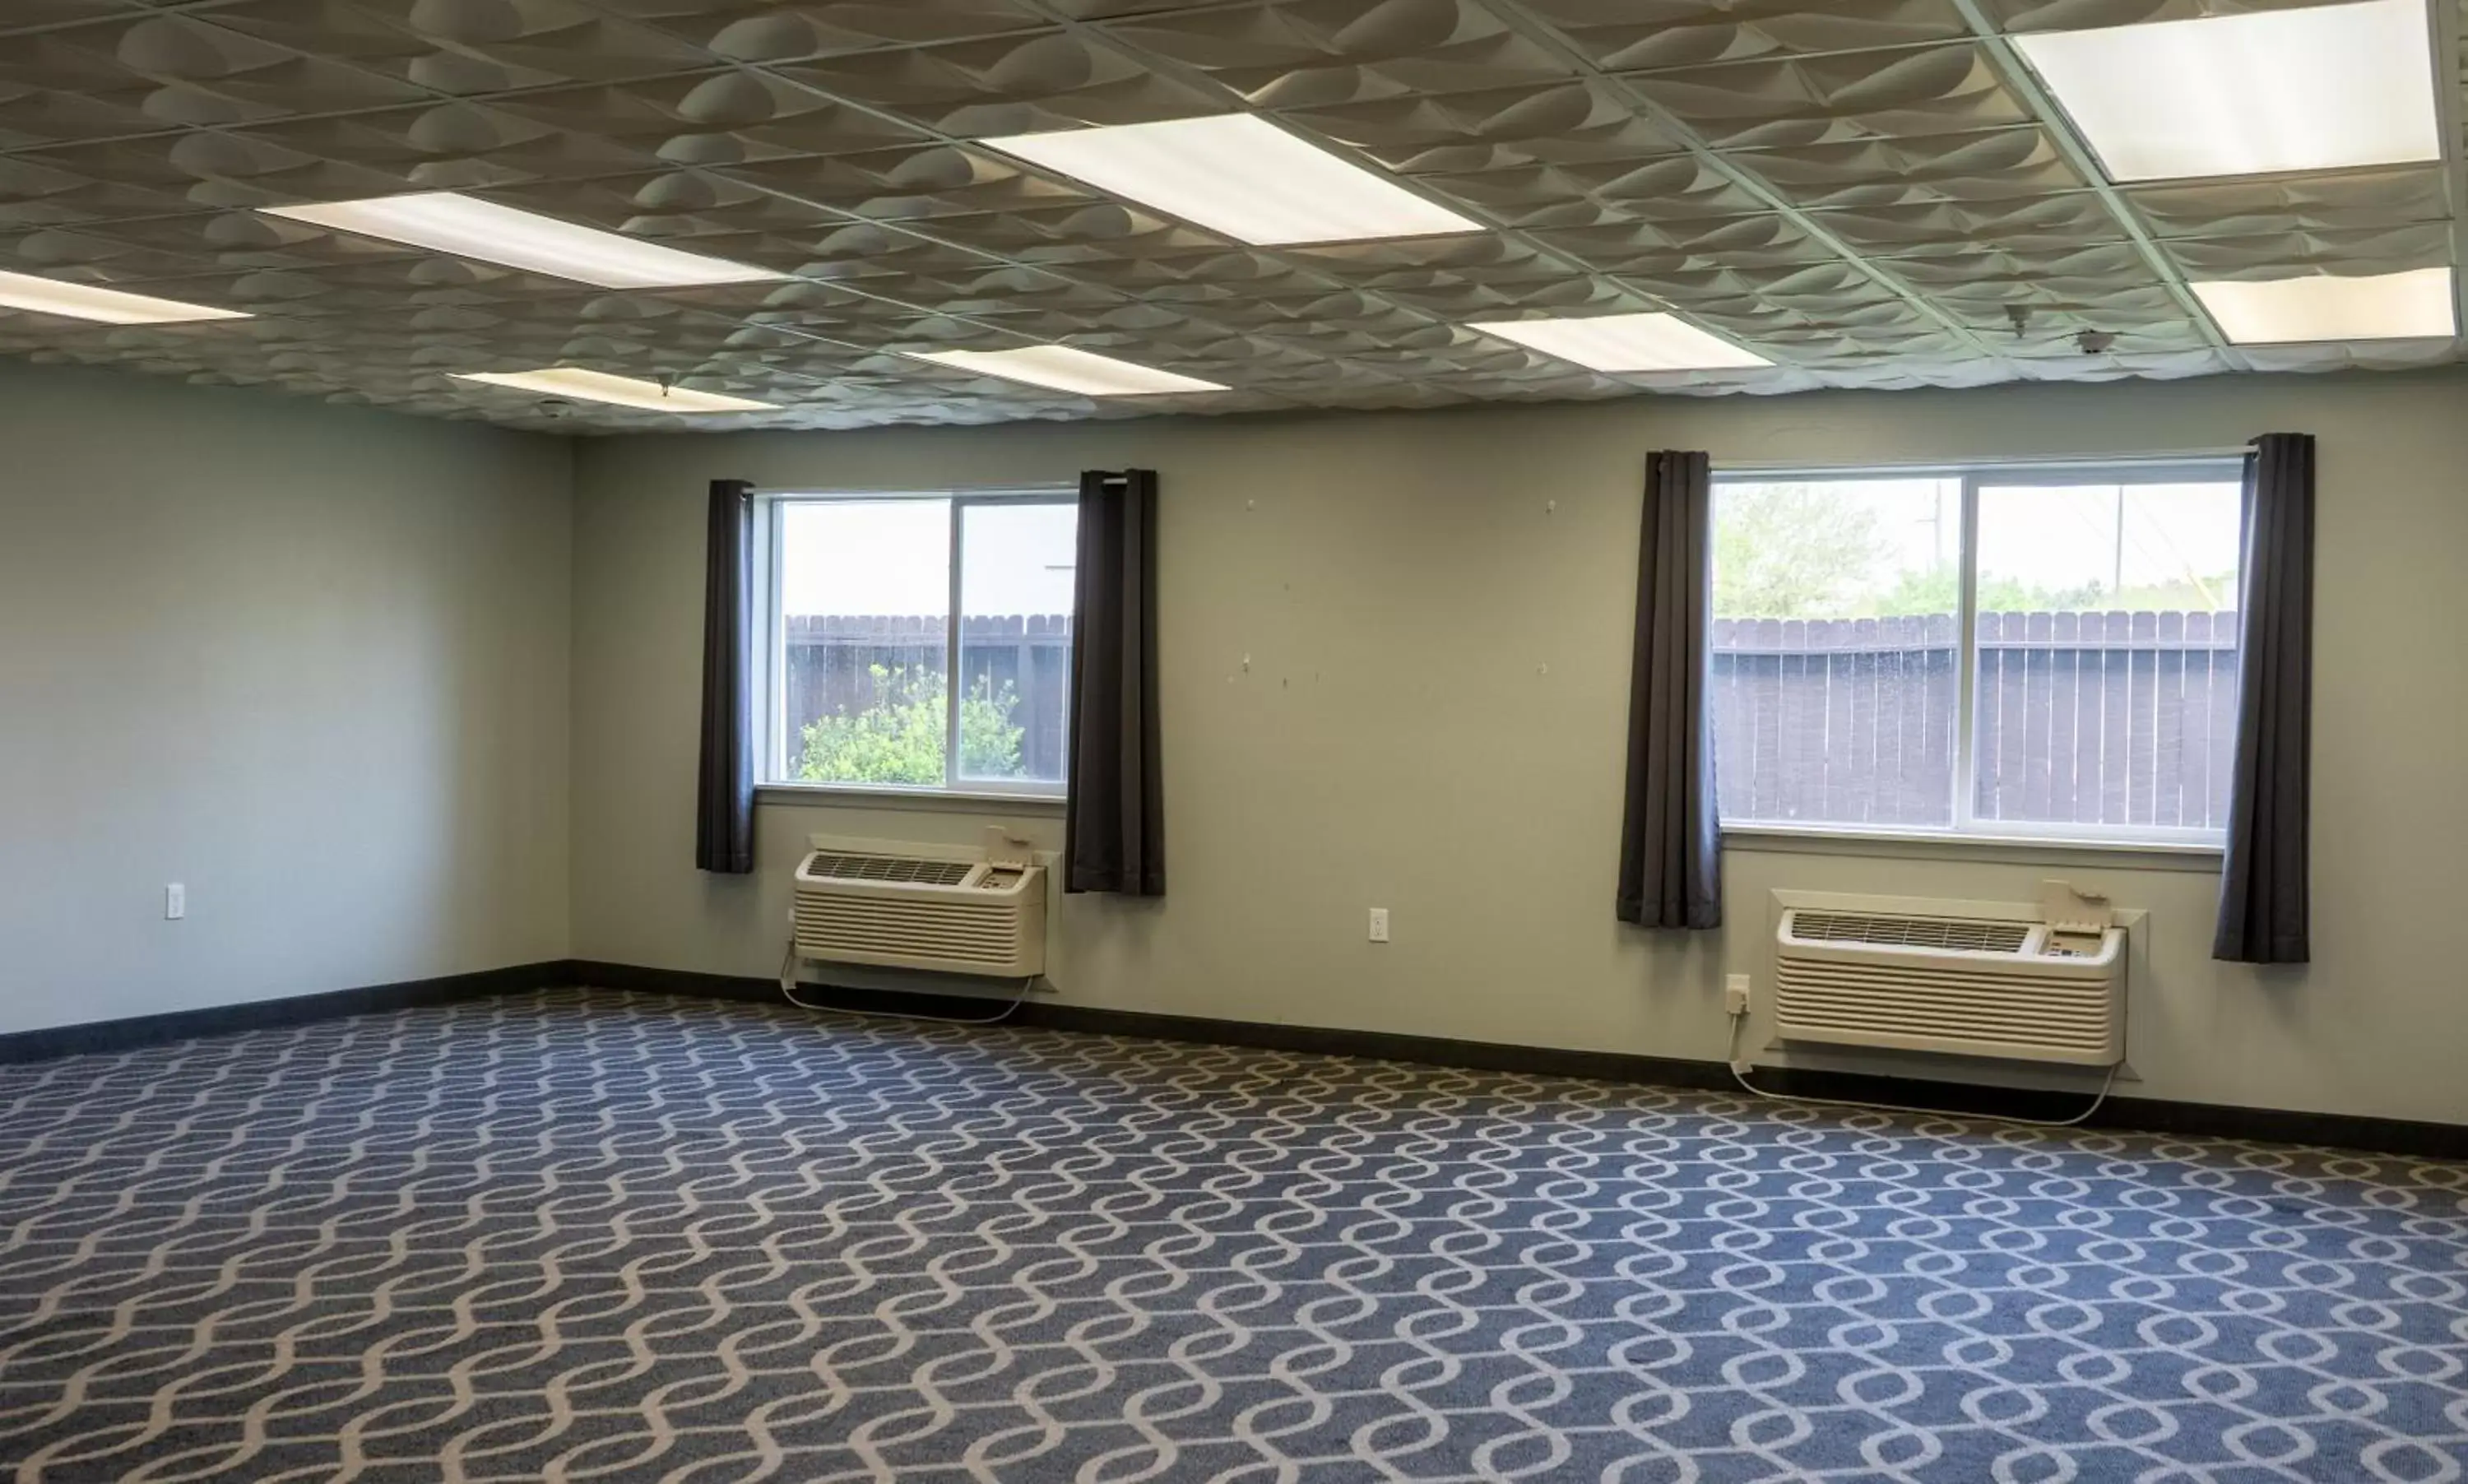 Meeting/conference room in Wingate by Wyndham Humble/Houston Intercontinental Airport